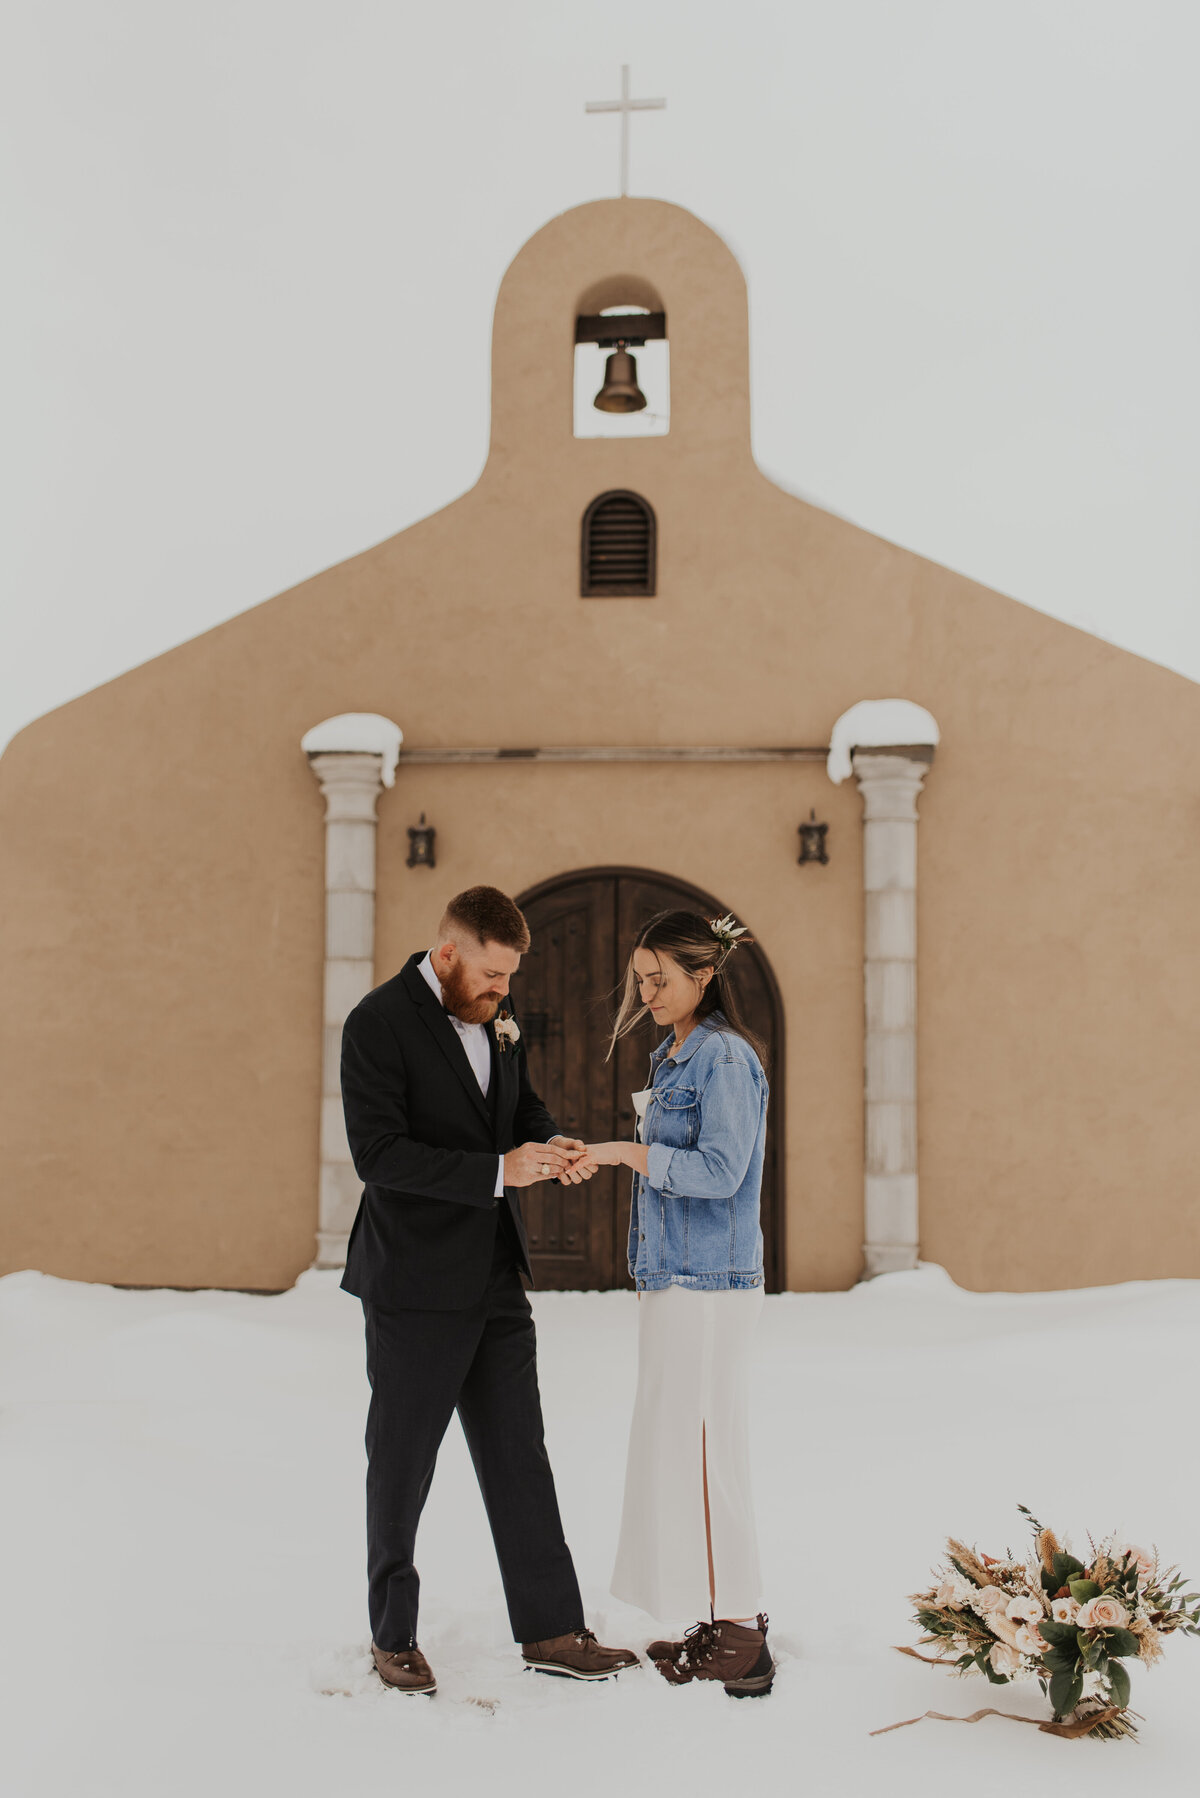 Kyle-and-abby-elopement-big-bend-by-bruna-kitchen-photography-3